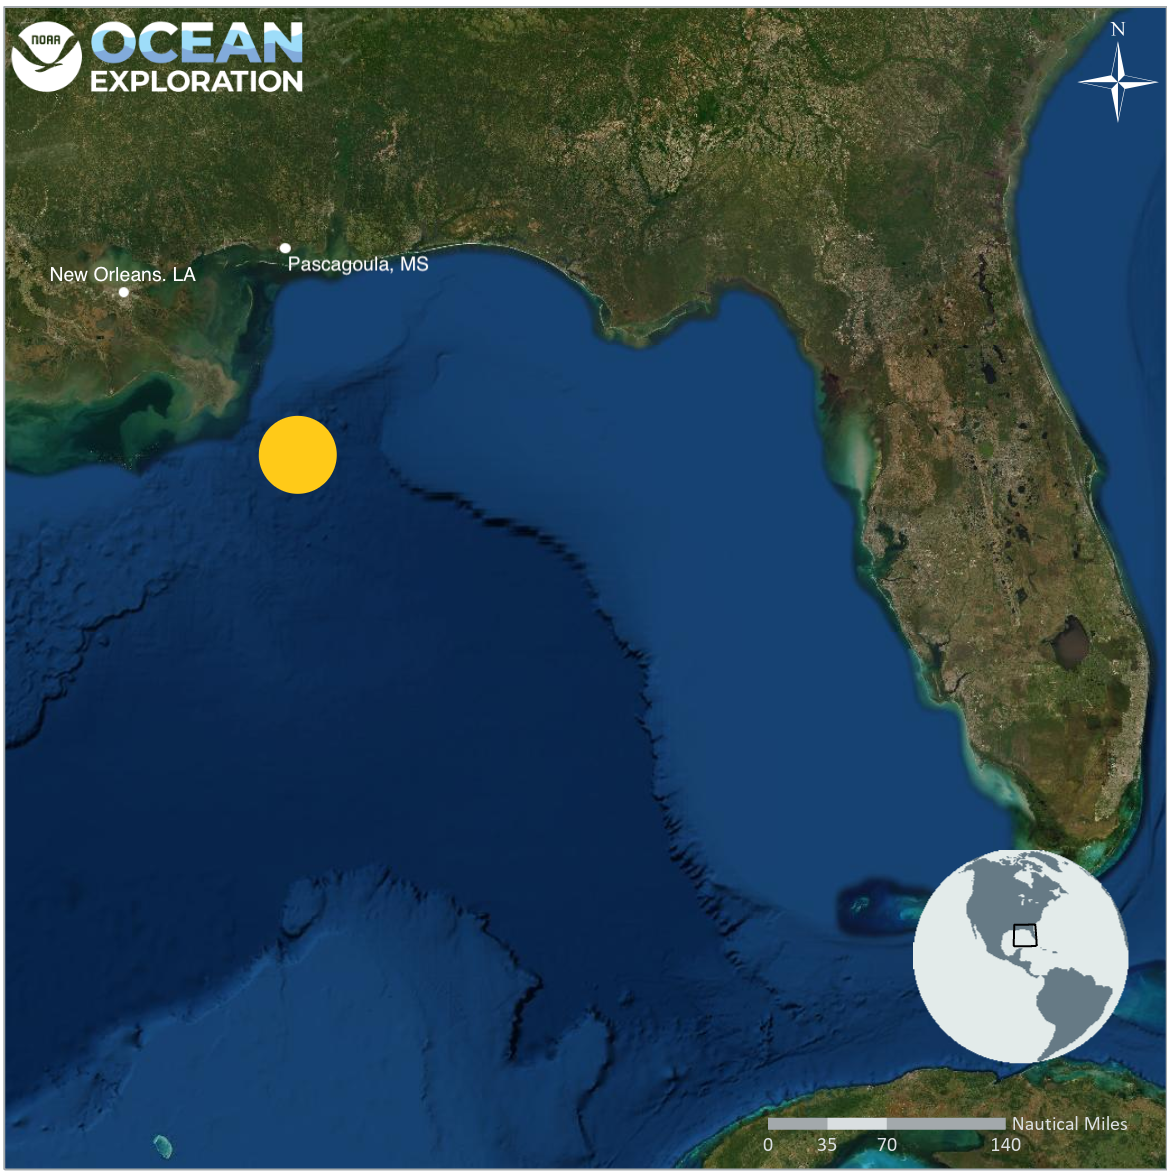 NOAA Ocean Exploration documented the brig Industry shipwreck in the Gulf of Mexico at a depth of 6,000 feet below the Gulf surface. The brig sank in the summer of 1836 after a storm snapped its masts and opened the hull to the sea. 